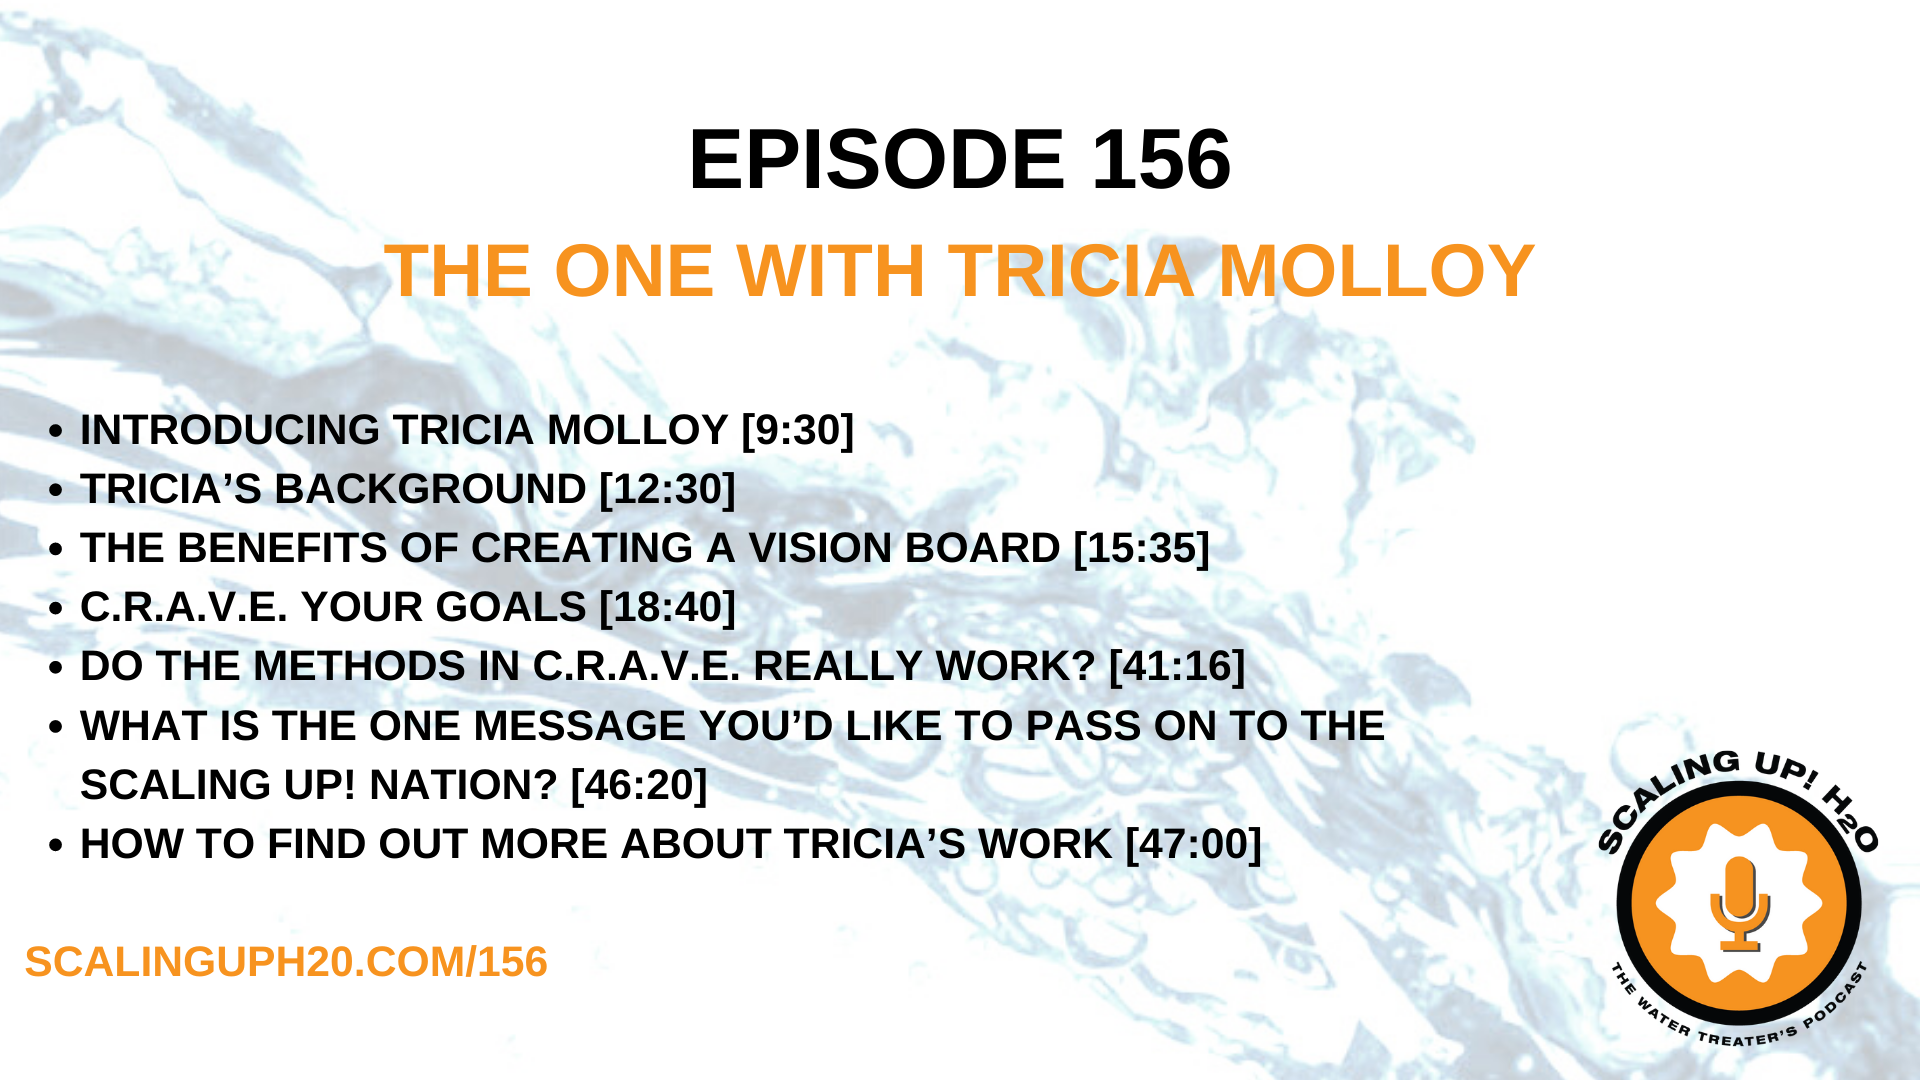 https://scalinguph2o.com/2020/09/18/156-the-one-with-tricia-molloy/